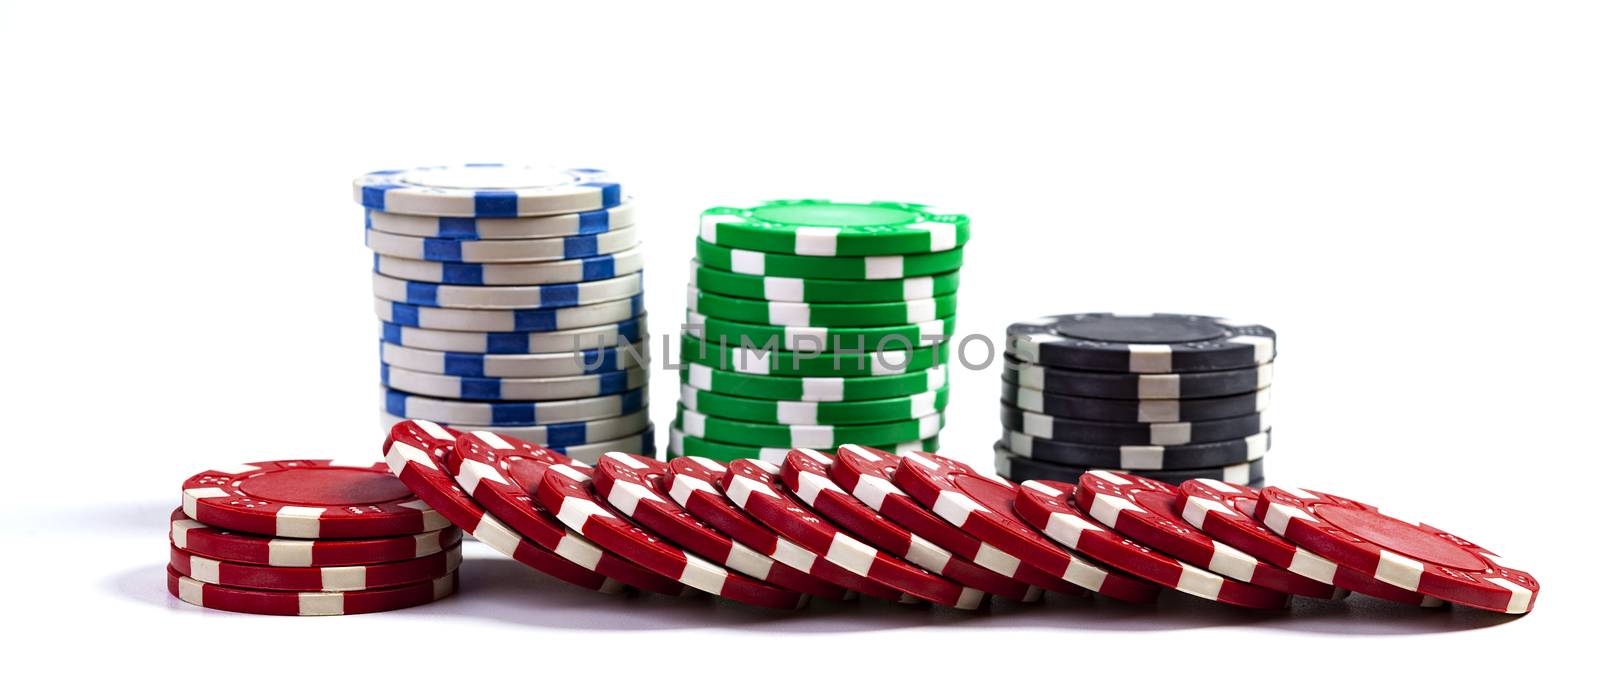 Casino Chips Pile Isolated On White Background